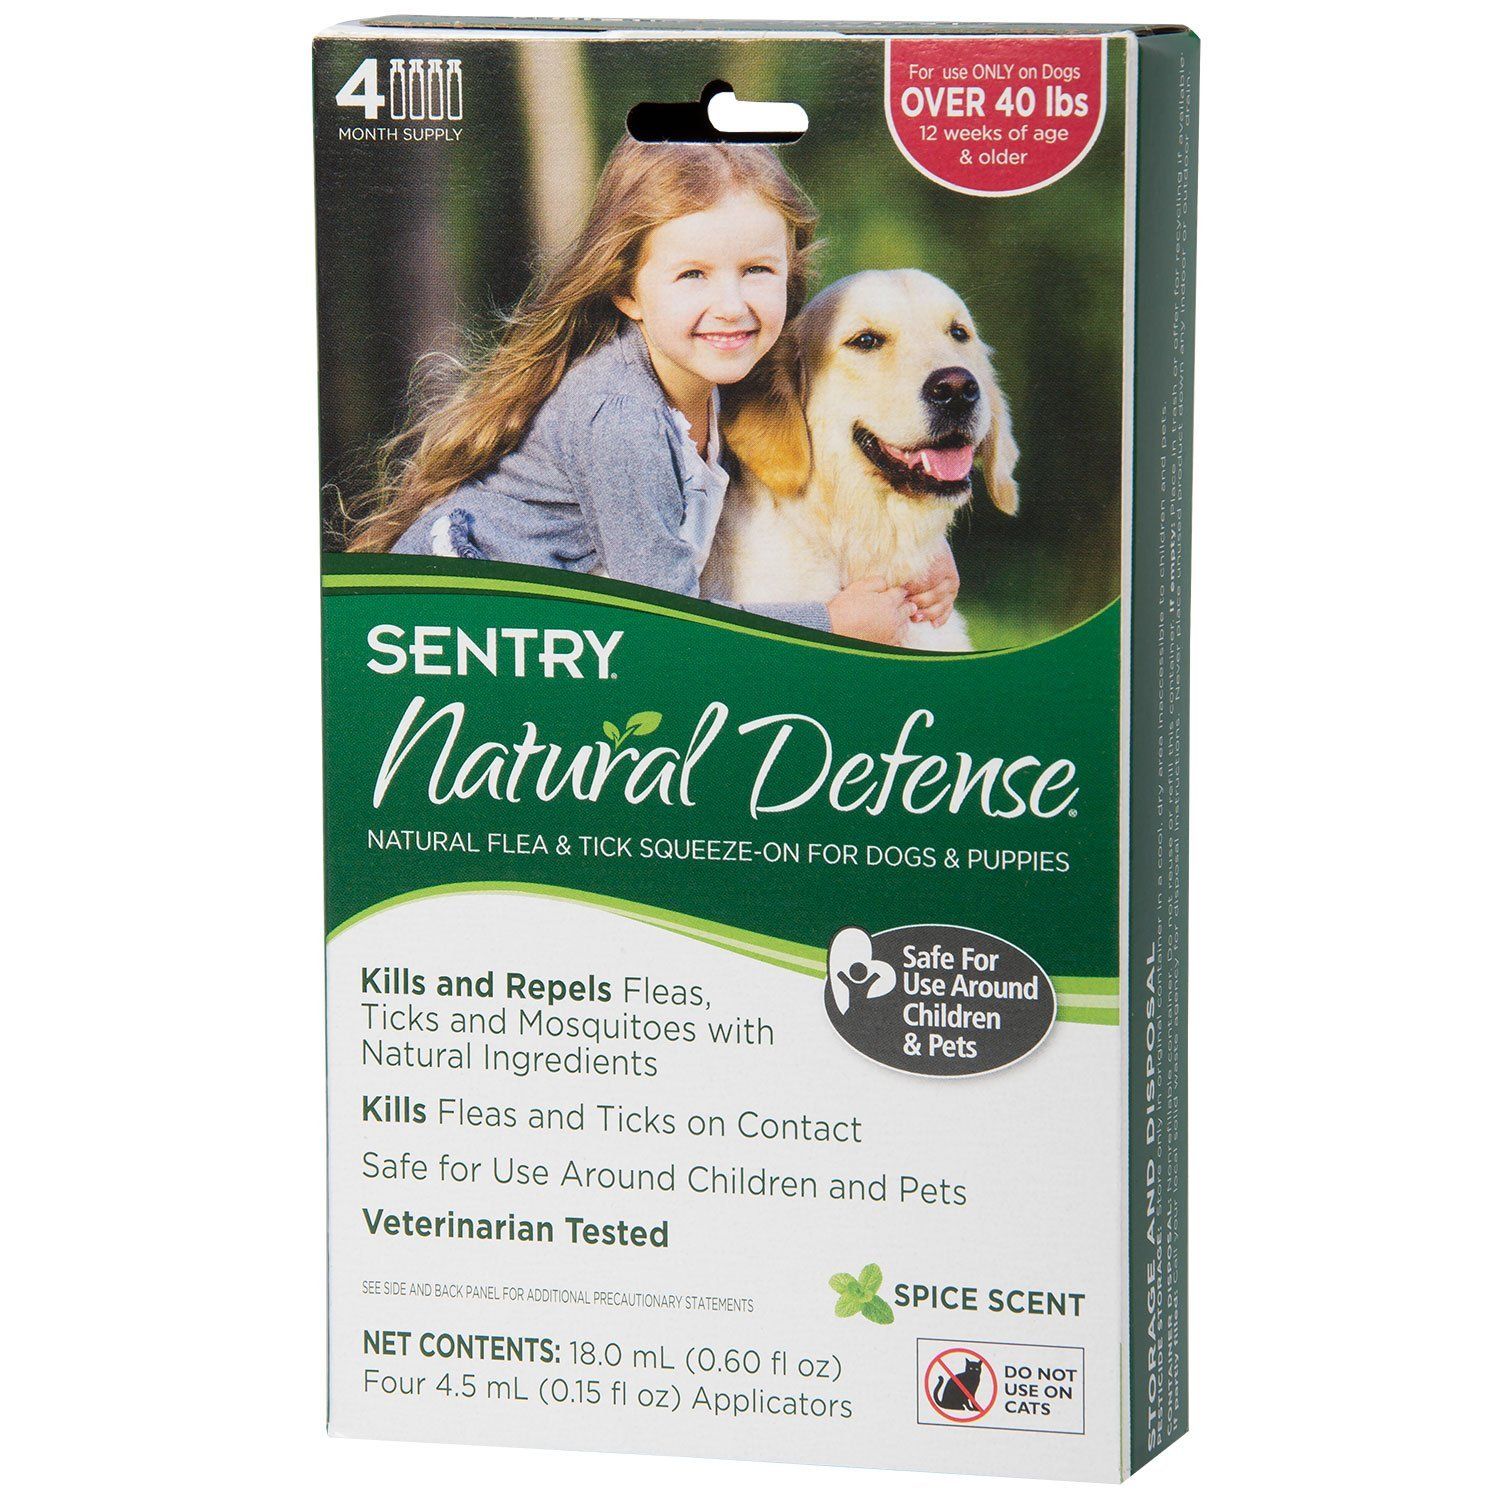 Buy Shoo Dog online and protect your dogs from fleas and ticks and ...